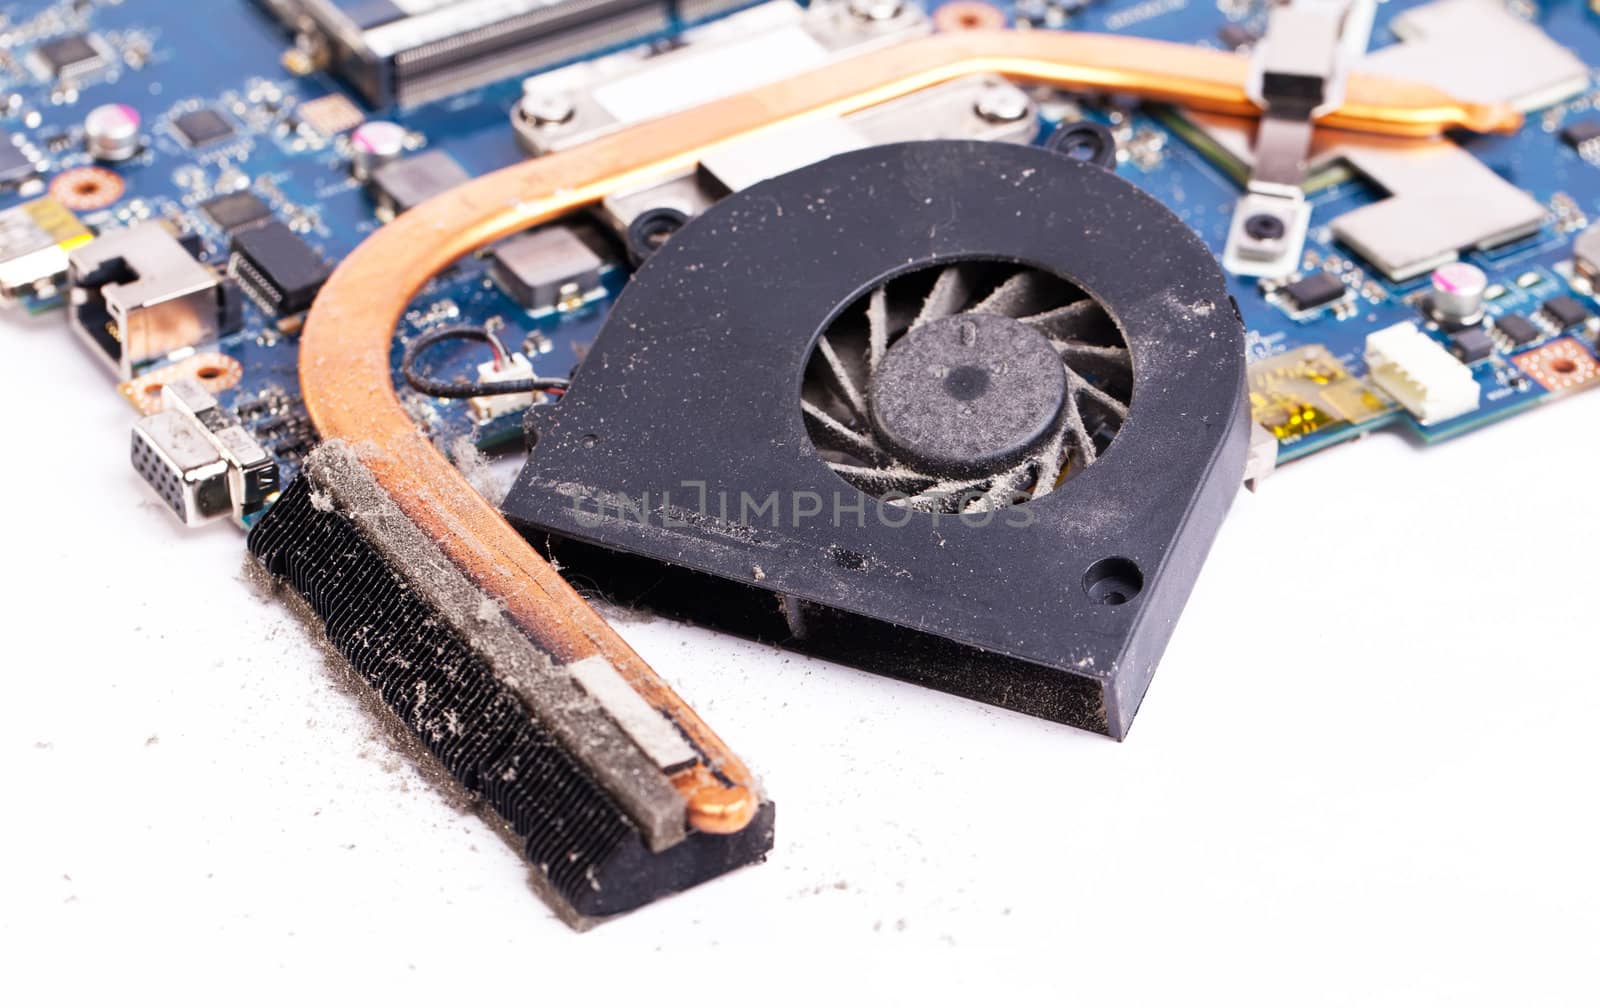 Dirty laptop cooling system inside by RawGroup